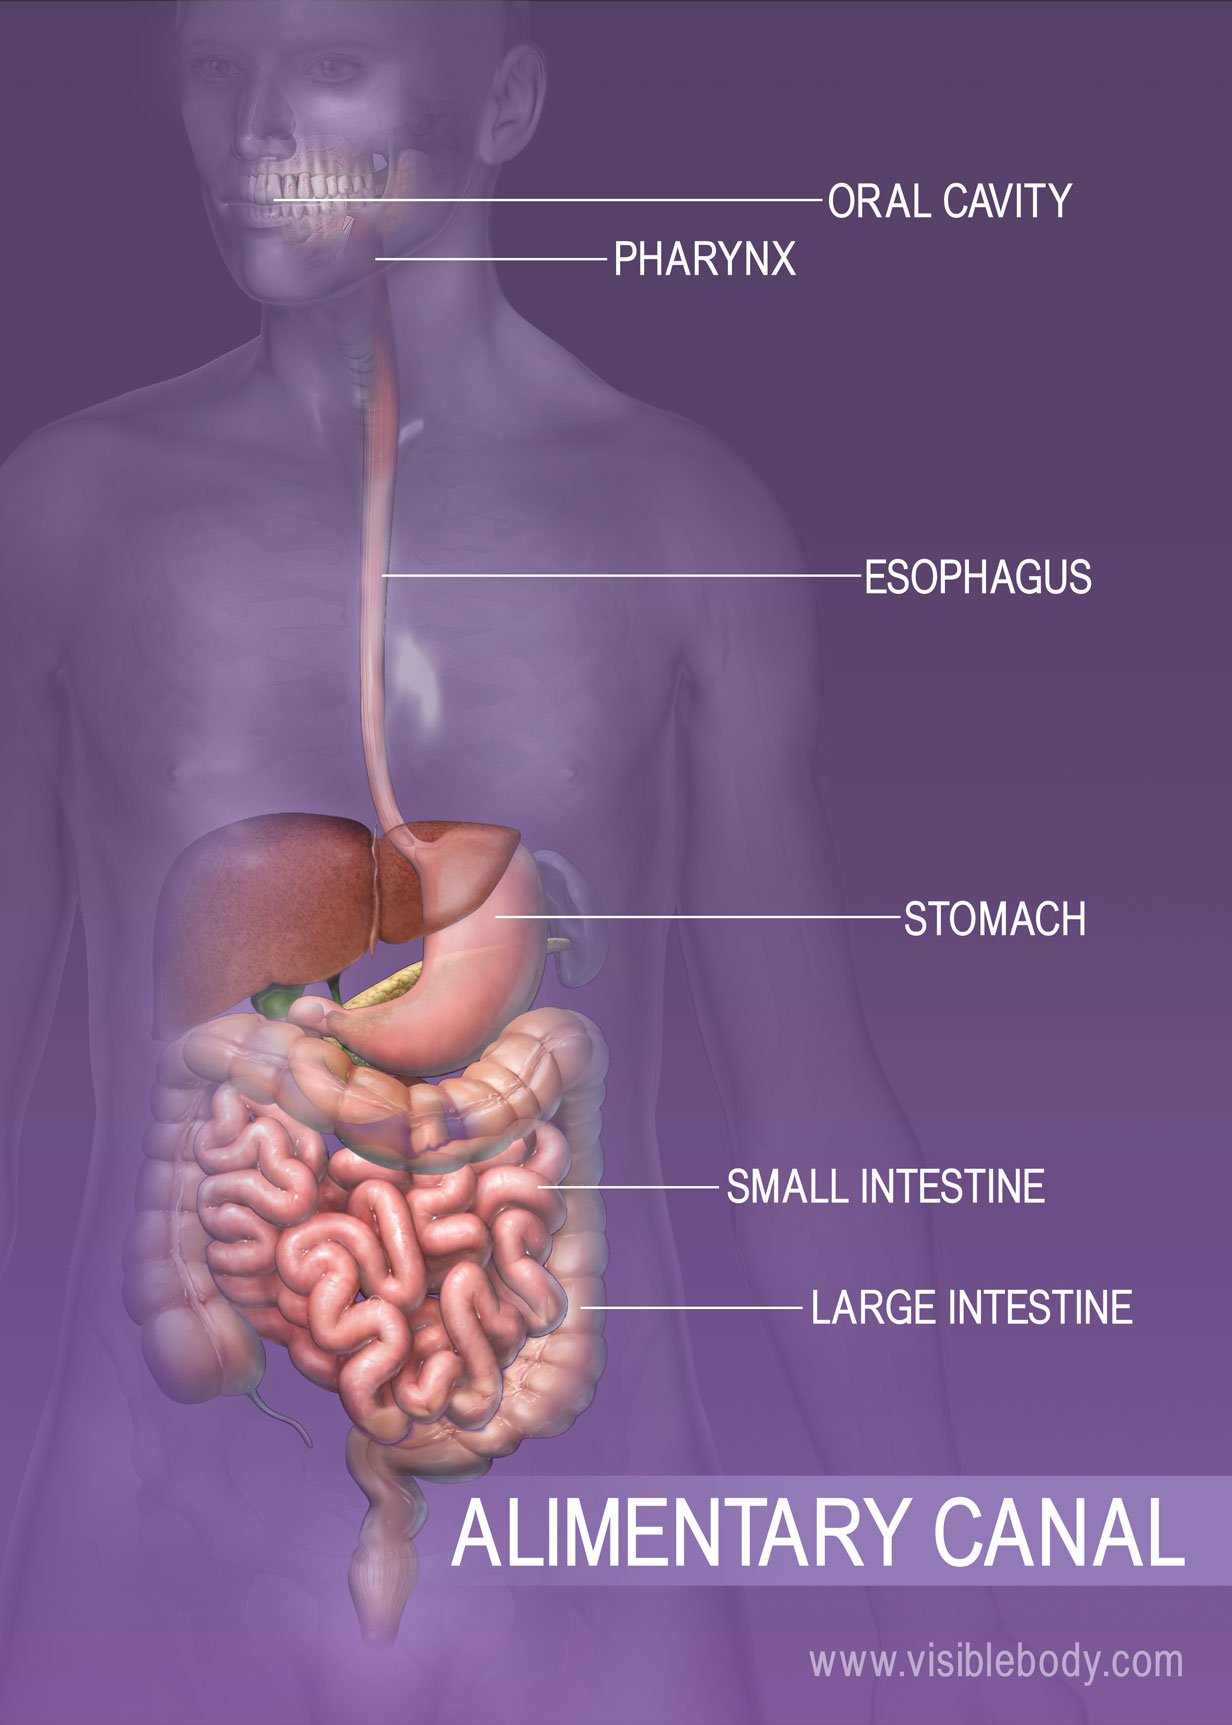 Overview of the digestive system